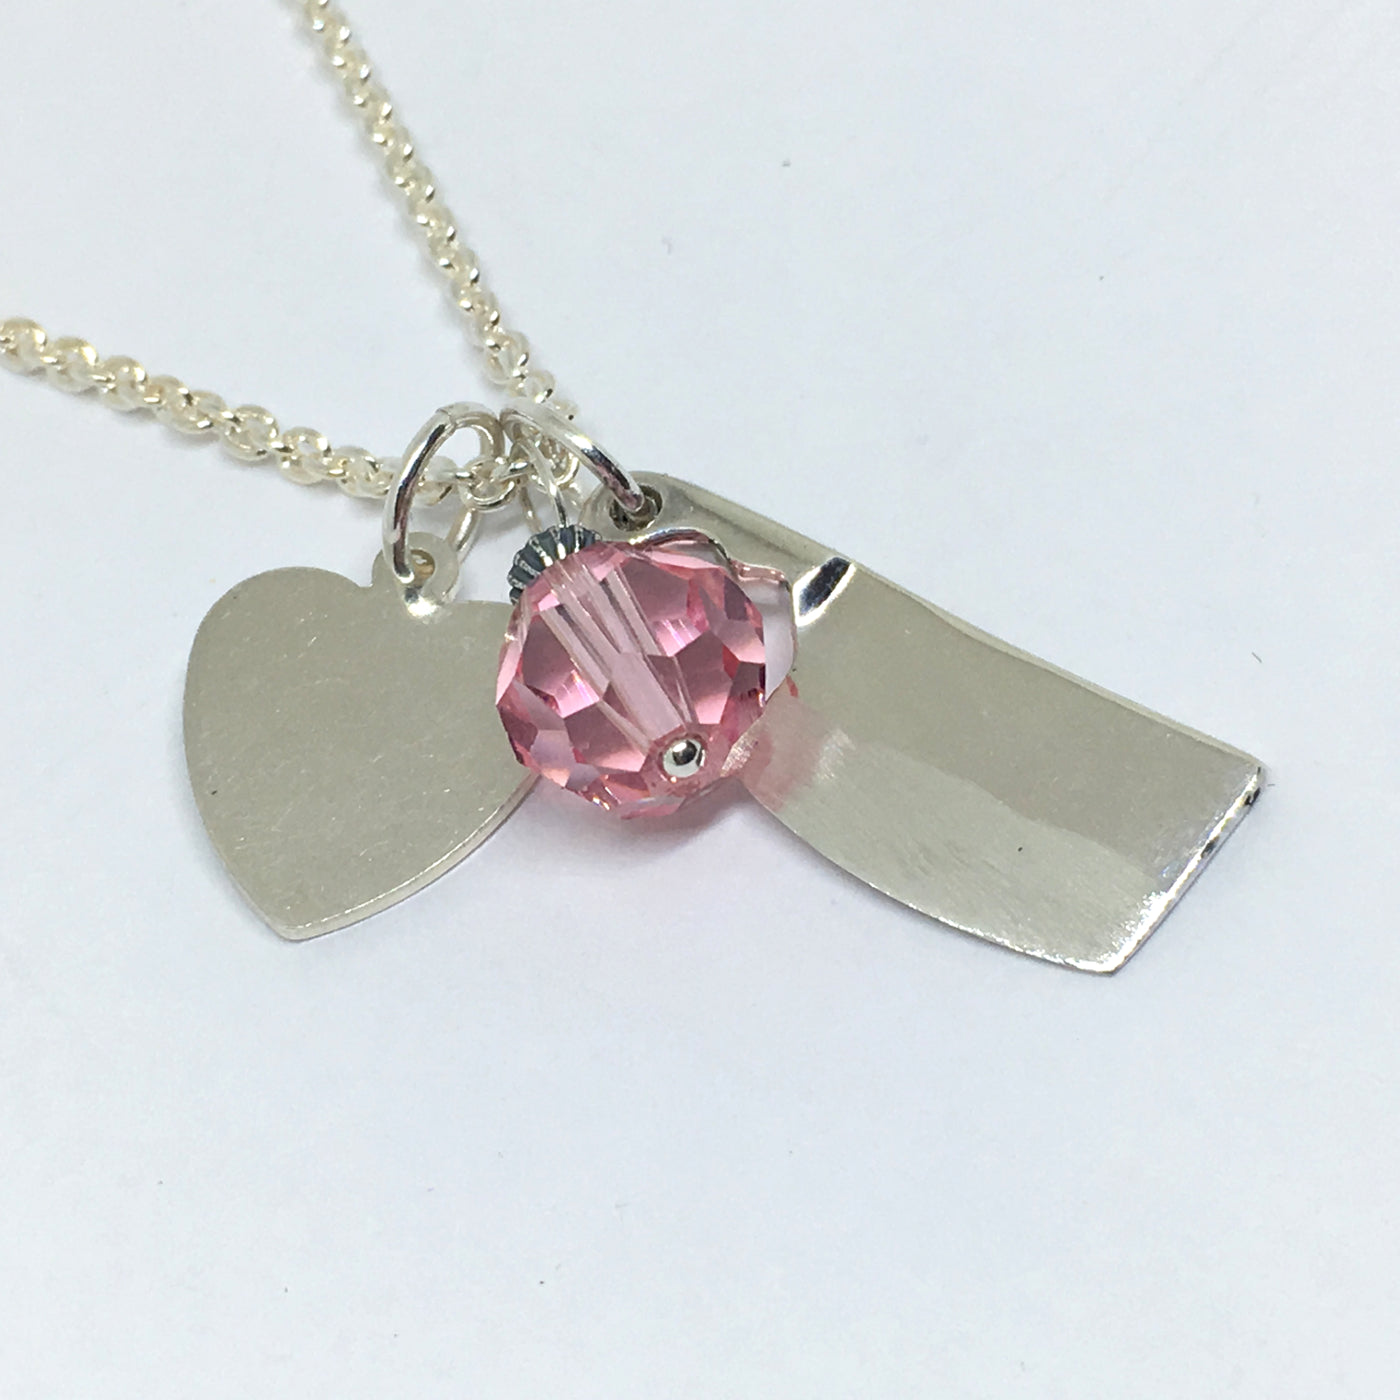 Personalized Chef Cleaver Cluster Necklace with Initials and Pink Swarovski Crystal